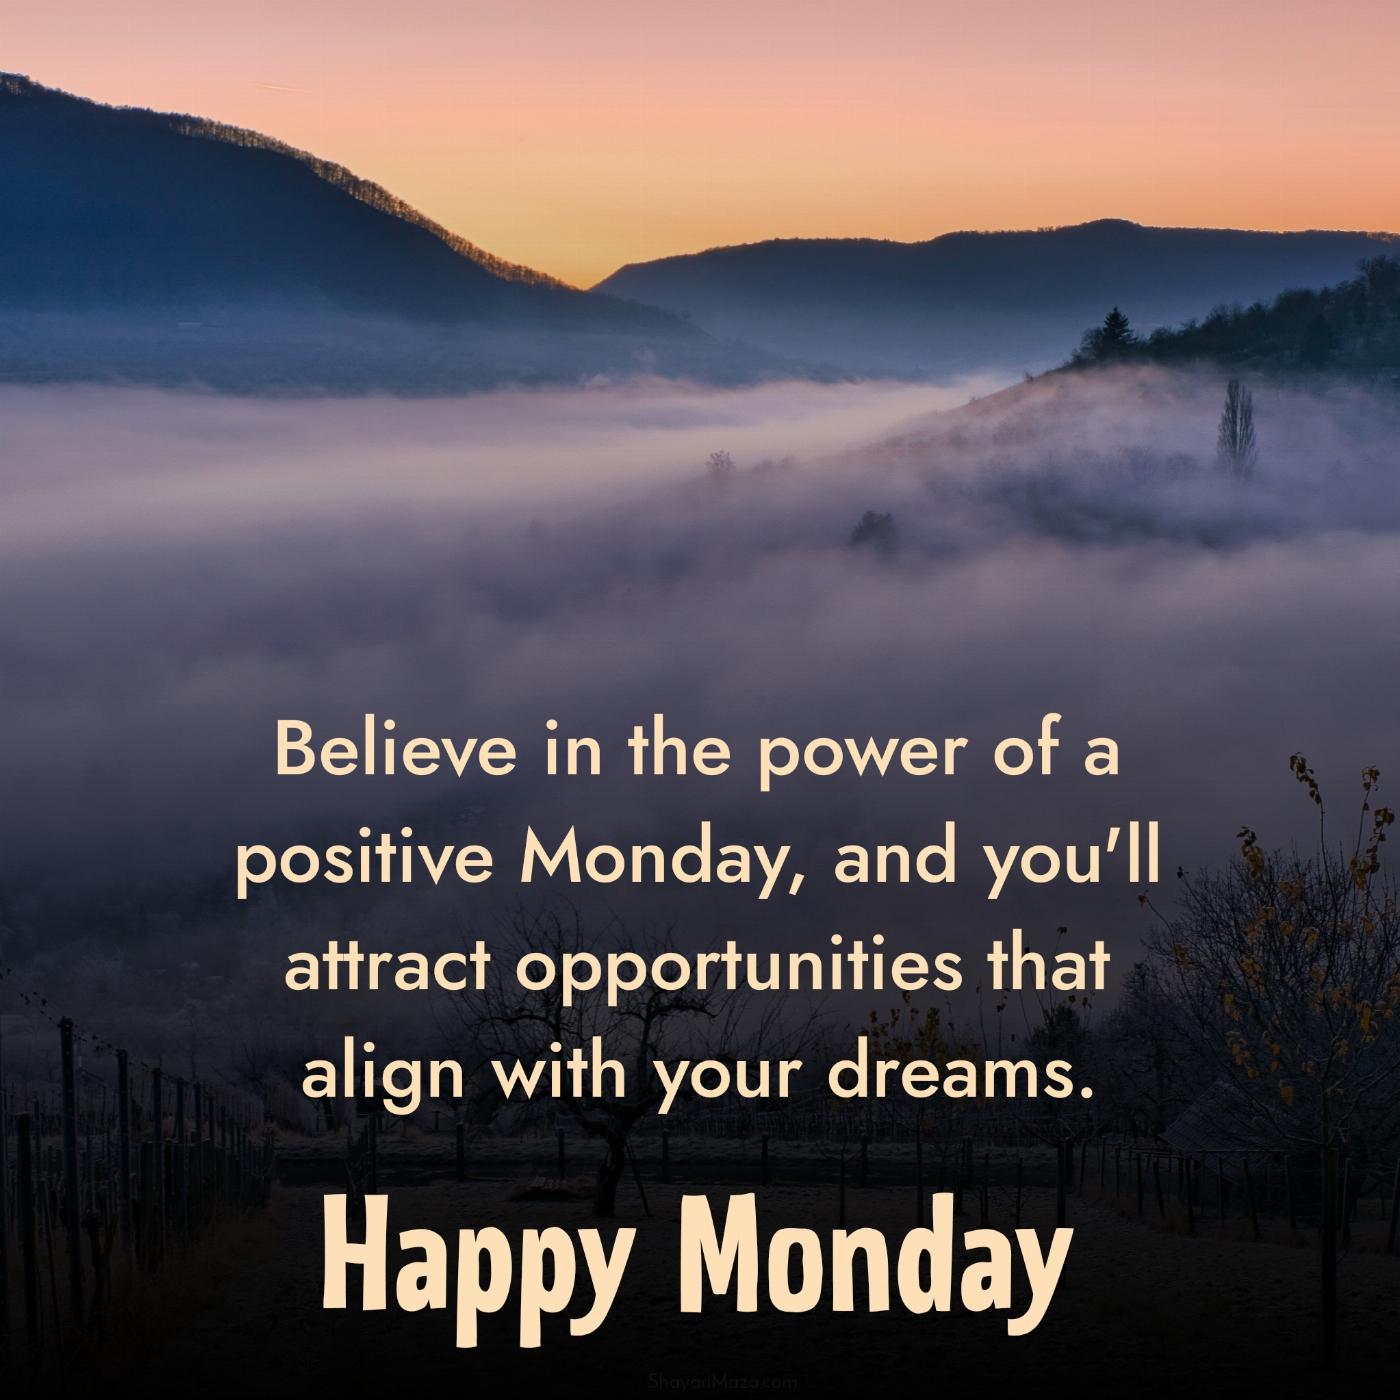 Believe in the power of a positive Monday